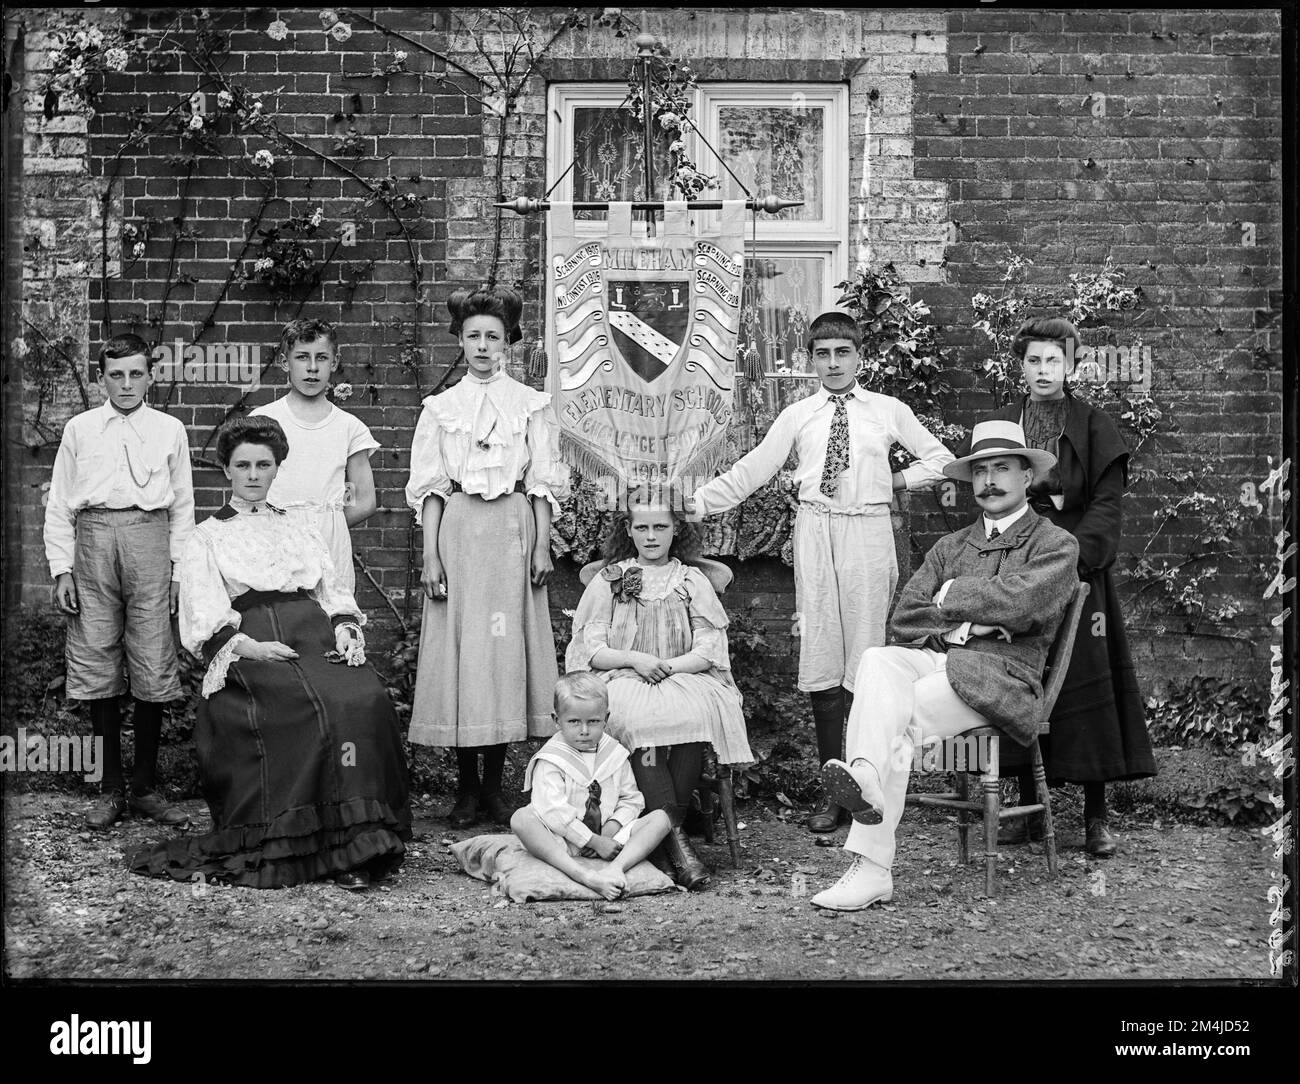 Edwardian or Victorian school photograph showing teachers and some ...